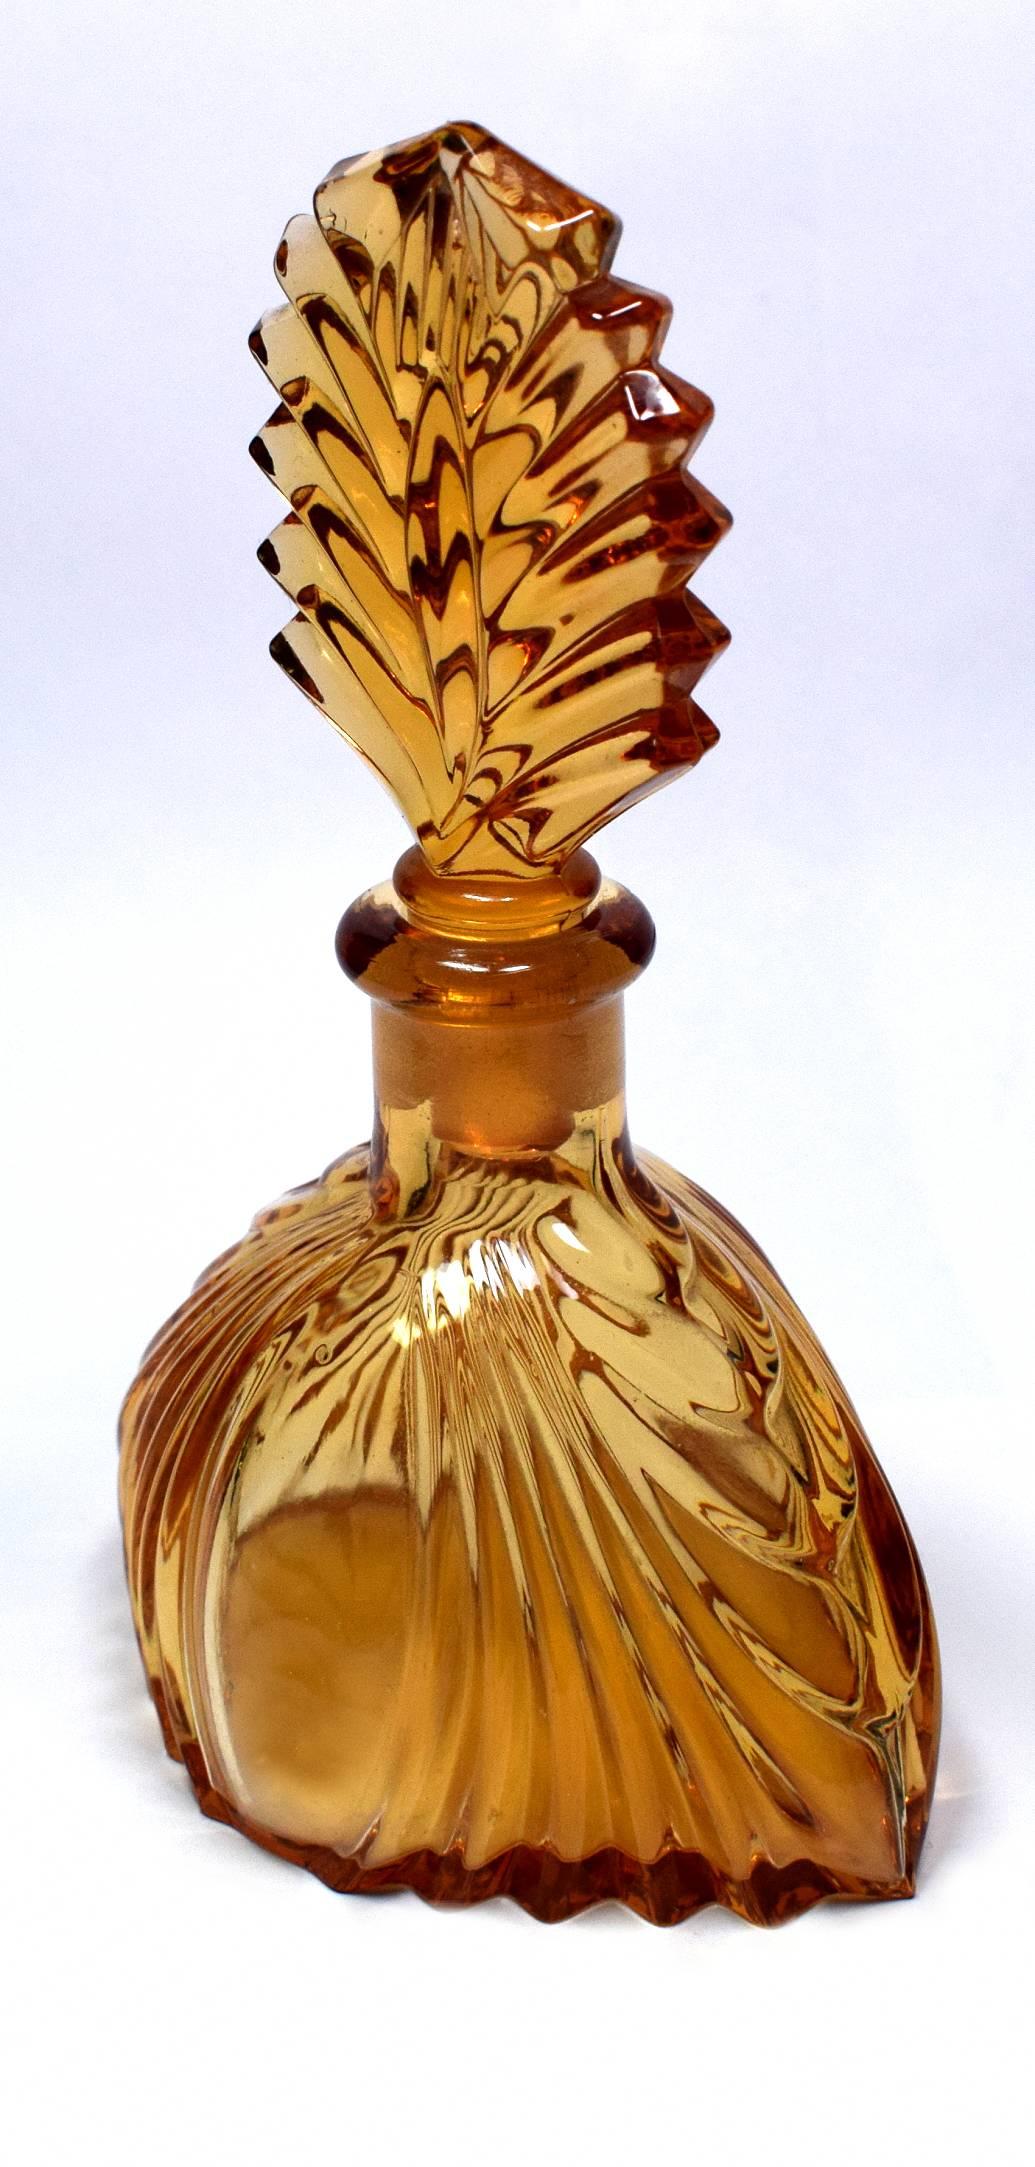 A really beautiful amber and clear colored Art Deco perfume bottle with a wonderful fan shaped glass stopper. In excellent condition with no chips or signs of use at all. A real collectors item for your Art Deco setting.